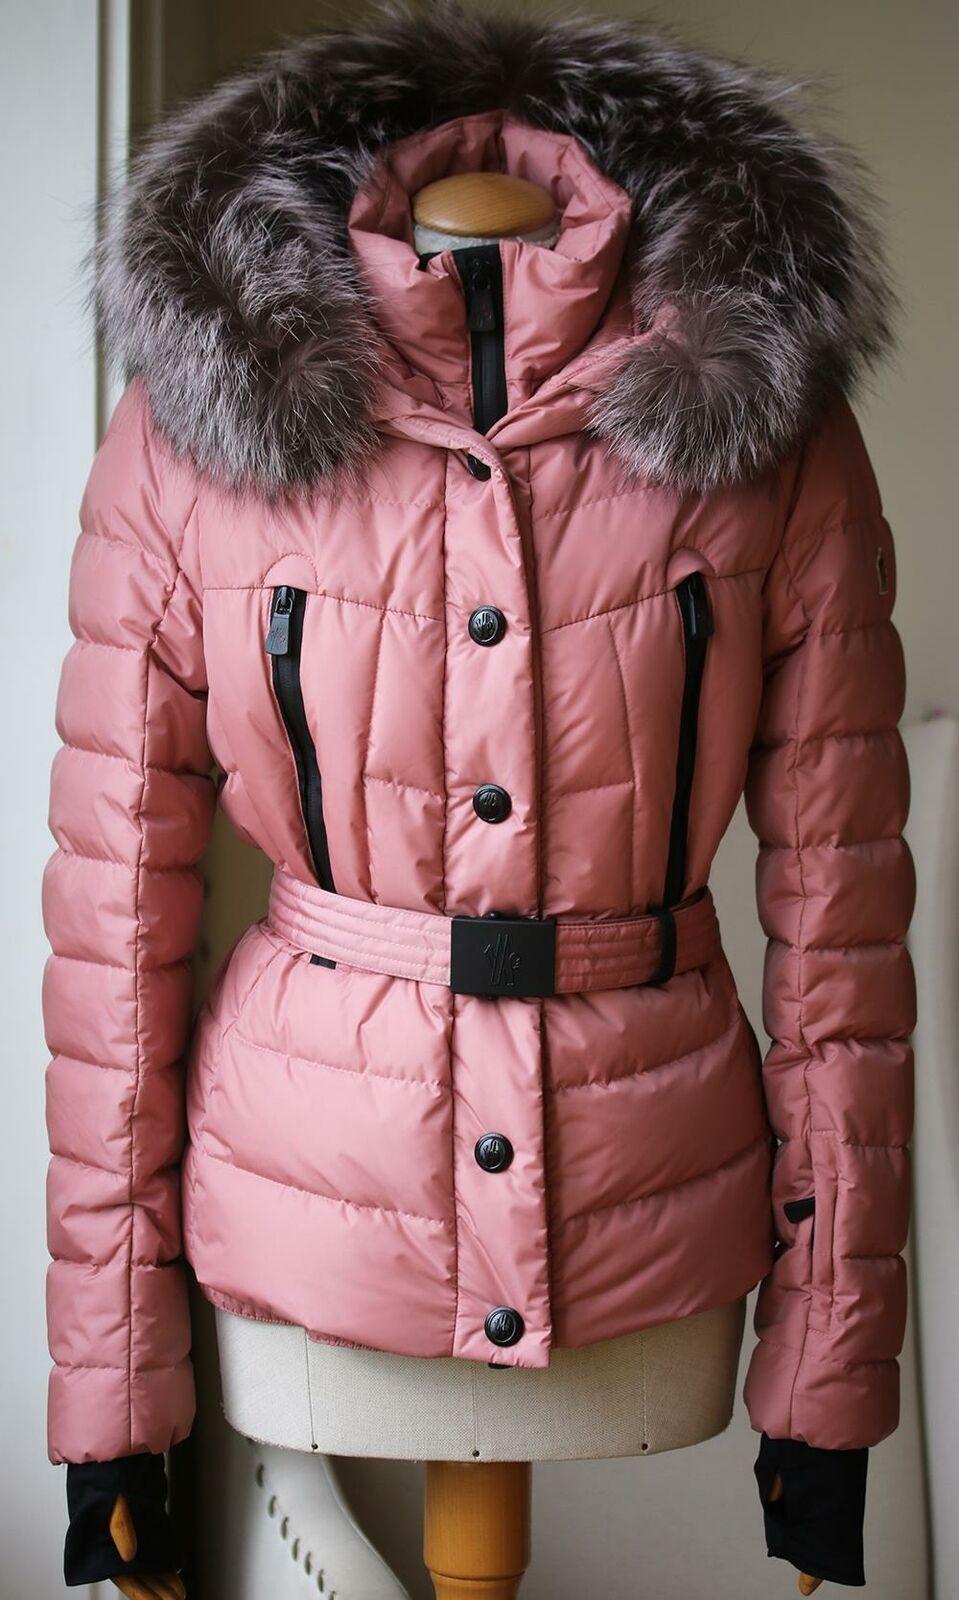 For your next trip to the mountains, Moncler Grenoble's Beverley ski jacket brings equal parts city chic and outdoor performance to your favourite winter activity. Designed for light sport, the style comes in a pink quilted technical fabric with